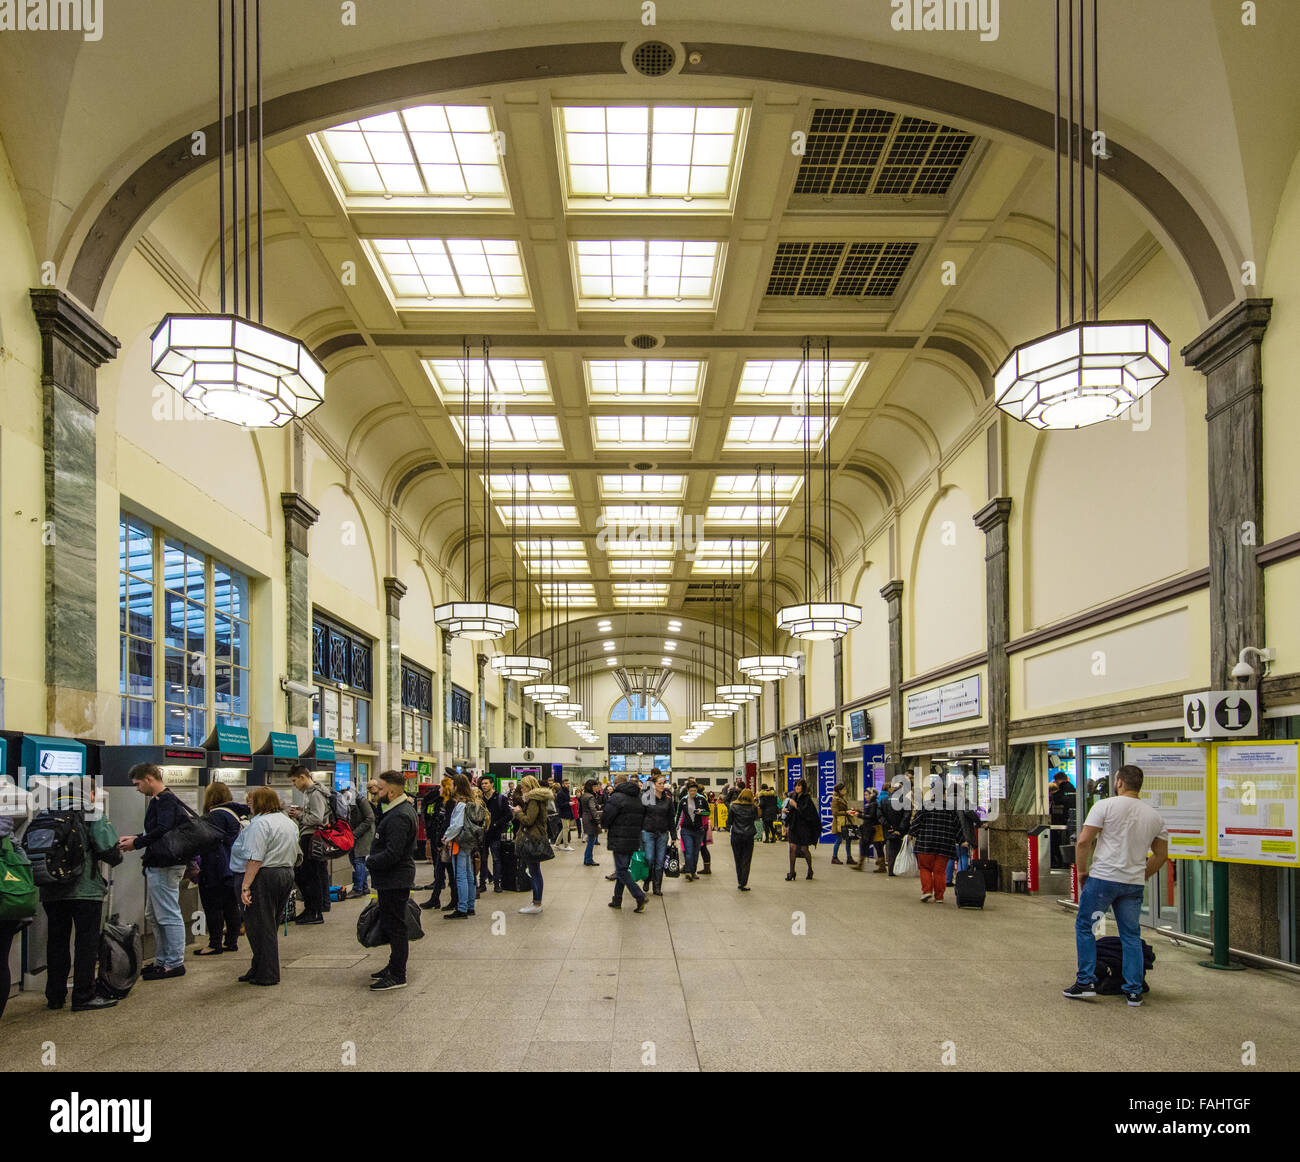 Art Deco interior of Cardiff Central railway station in Wales busy with evening commuters Stock Photo